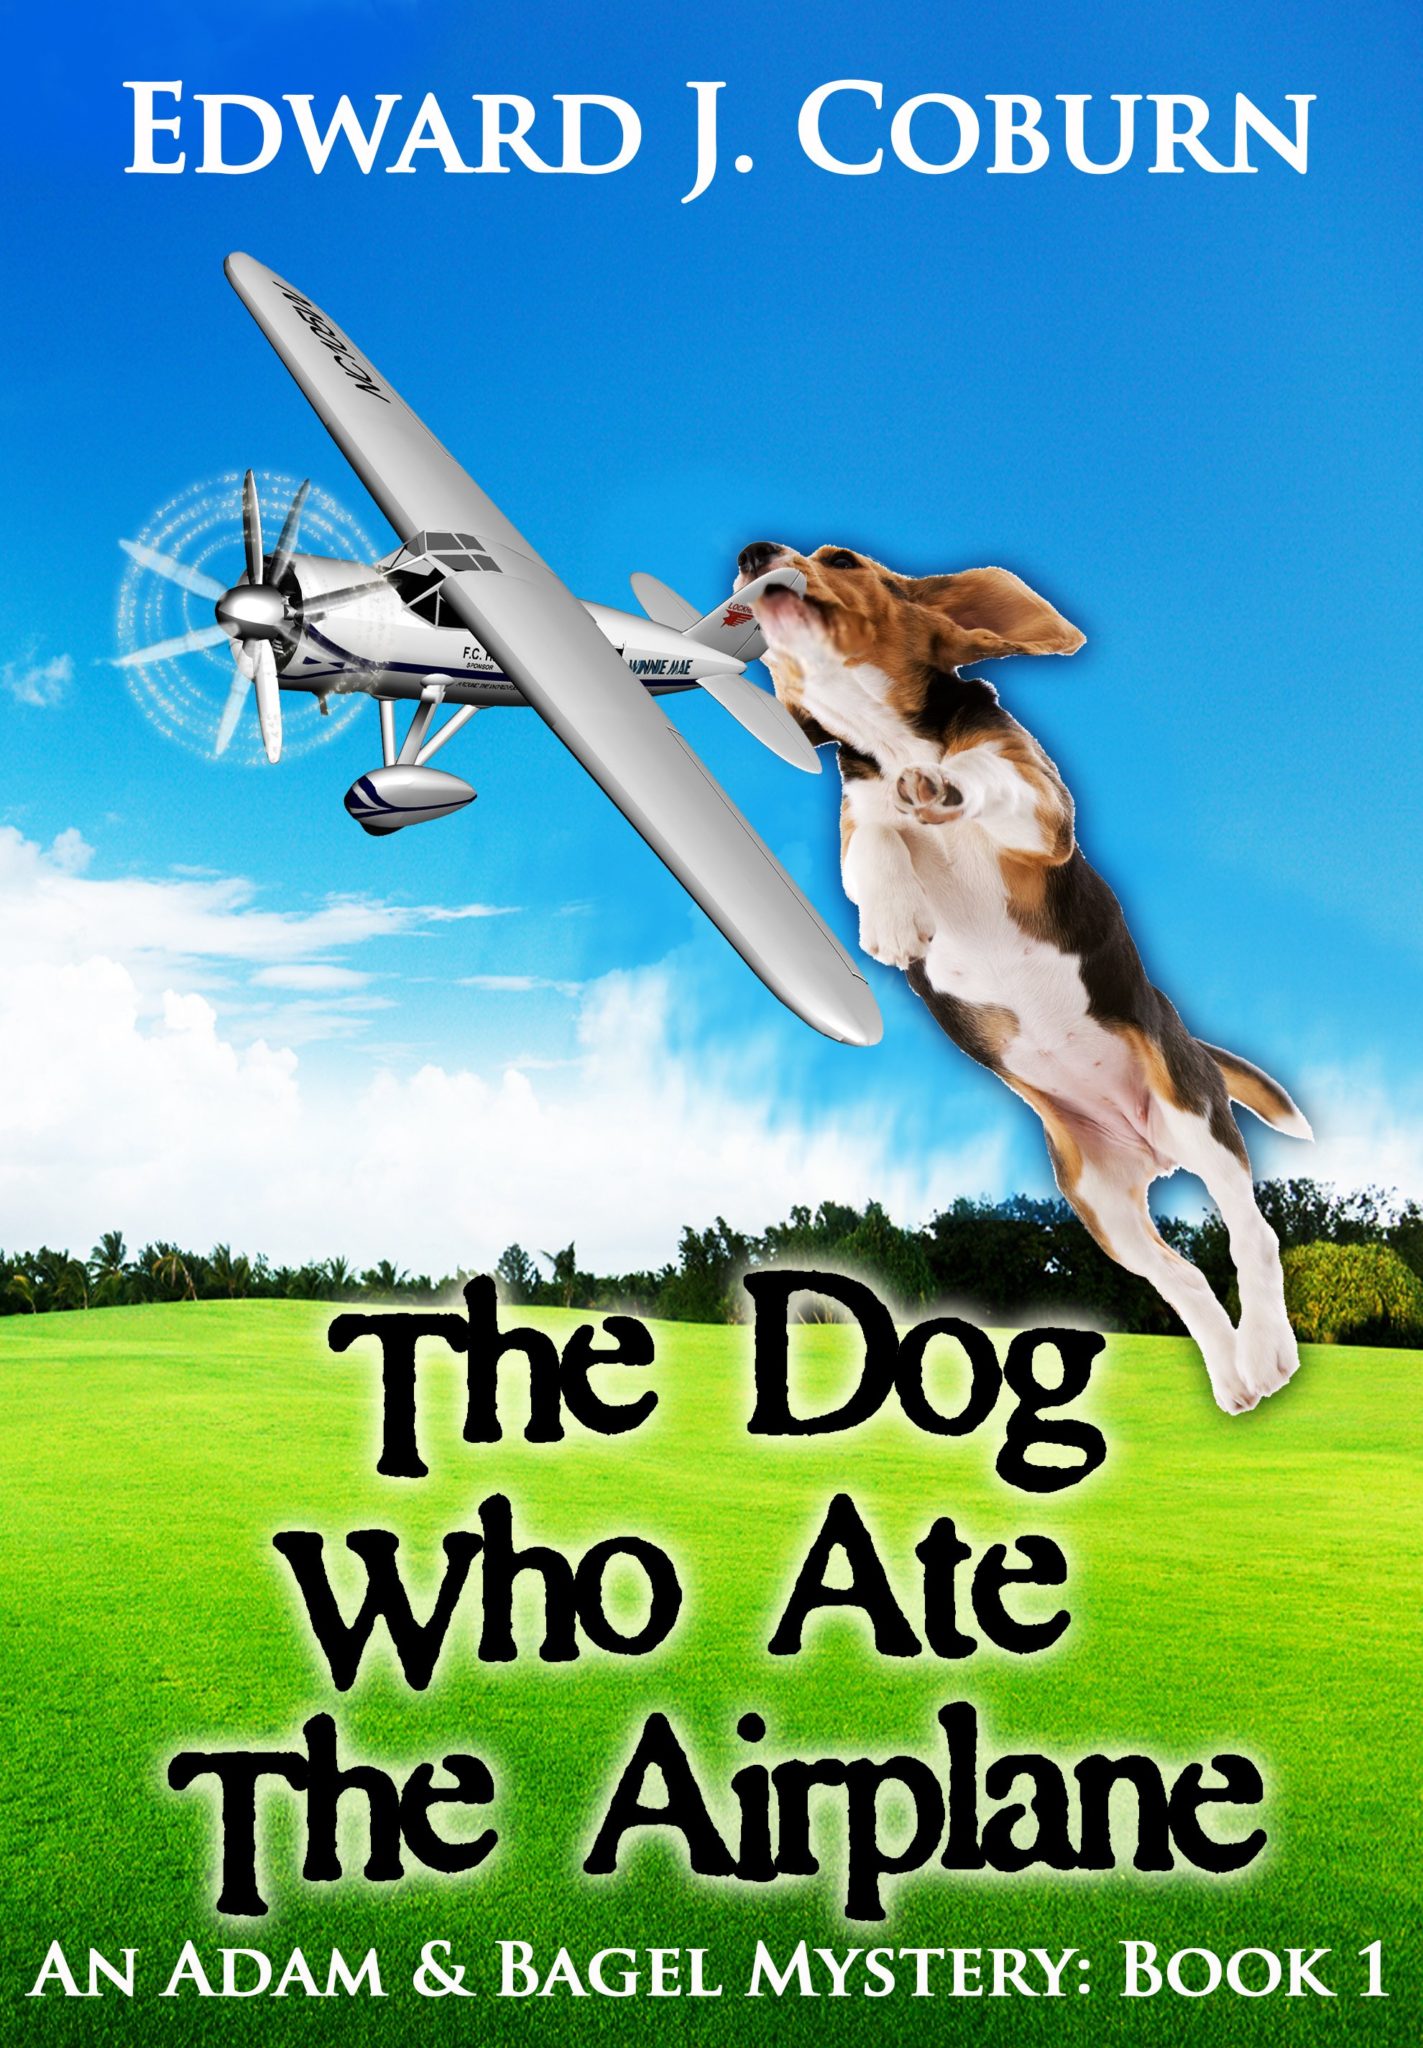 The Dog Who Ate The Airplane by Edward J. Coburn